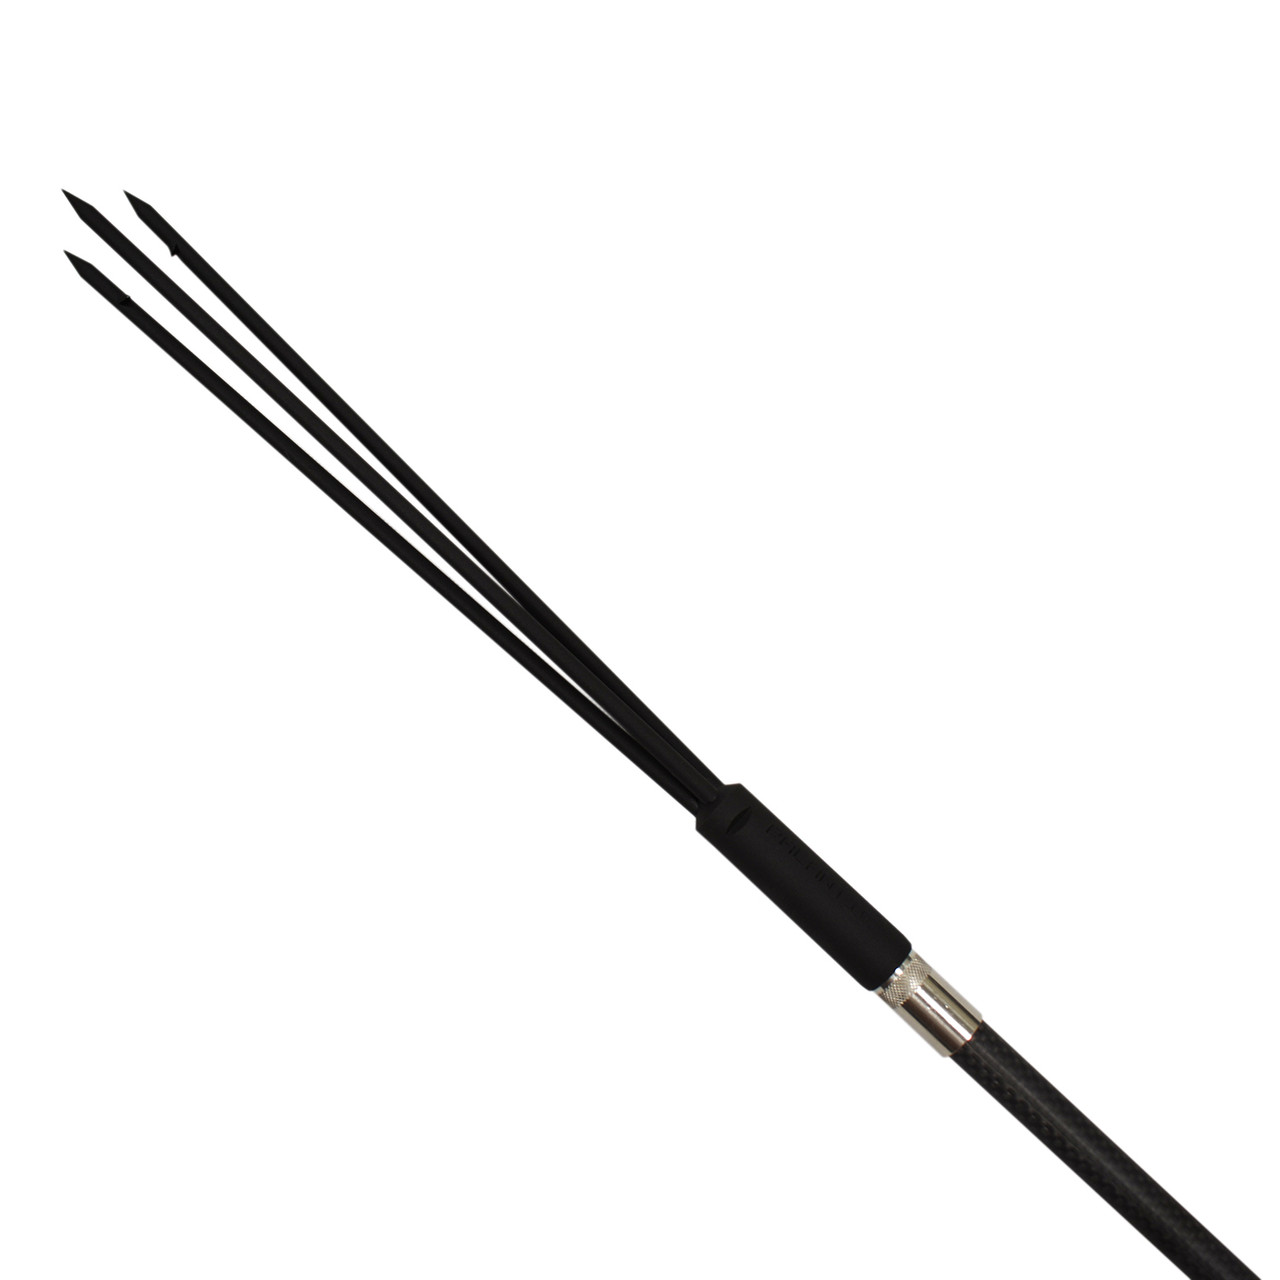 7' Travel Spearfishing 3Piece Pole Spear 1 Prong Single Barb Tip Adjustable  5' - scubachoice